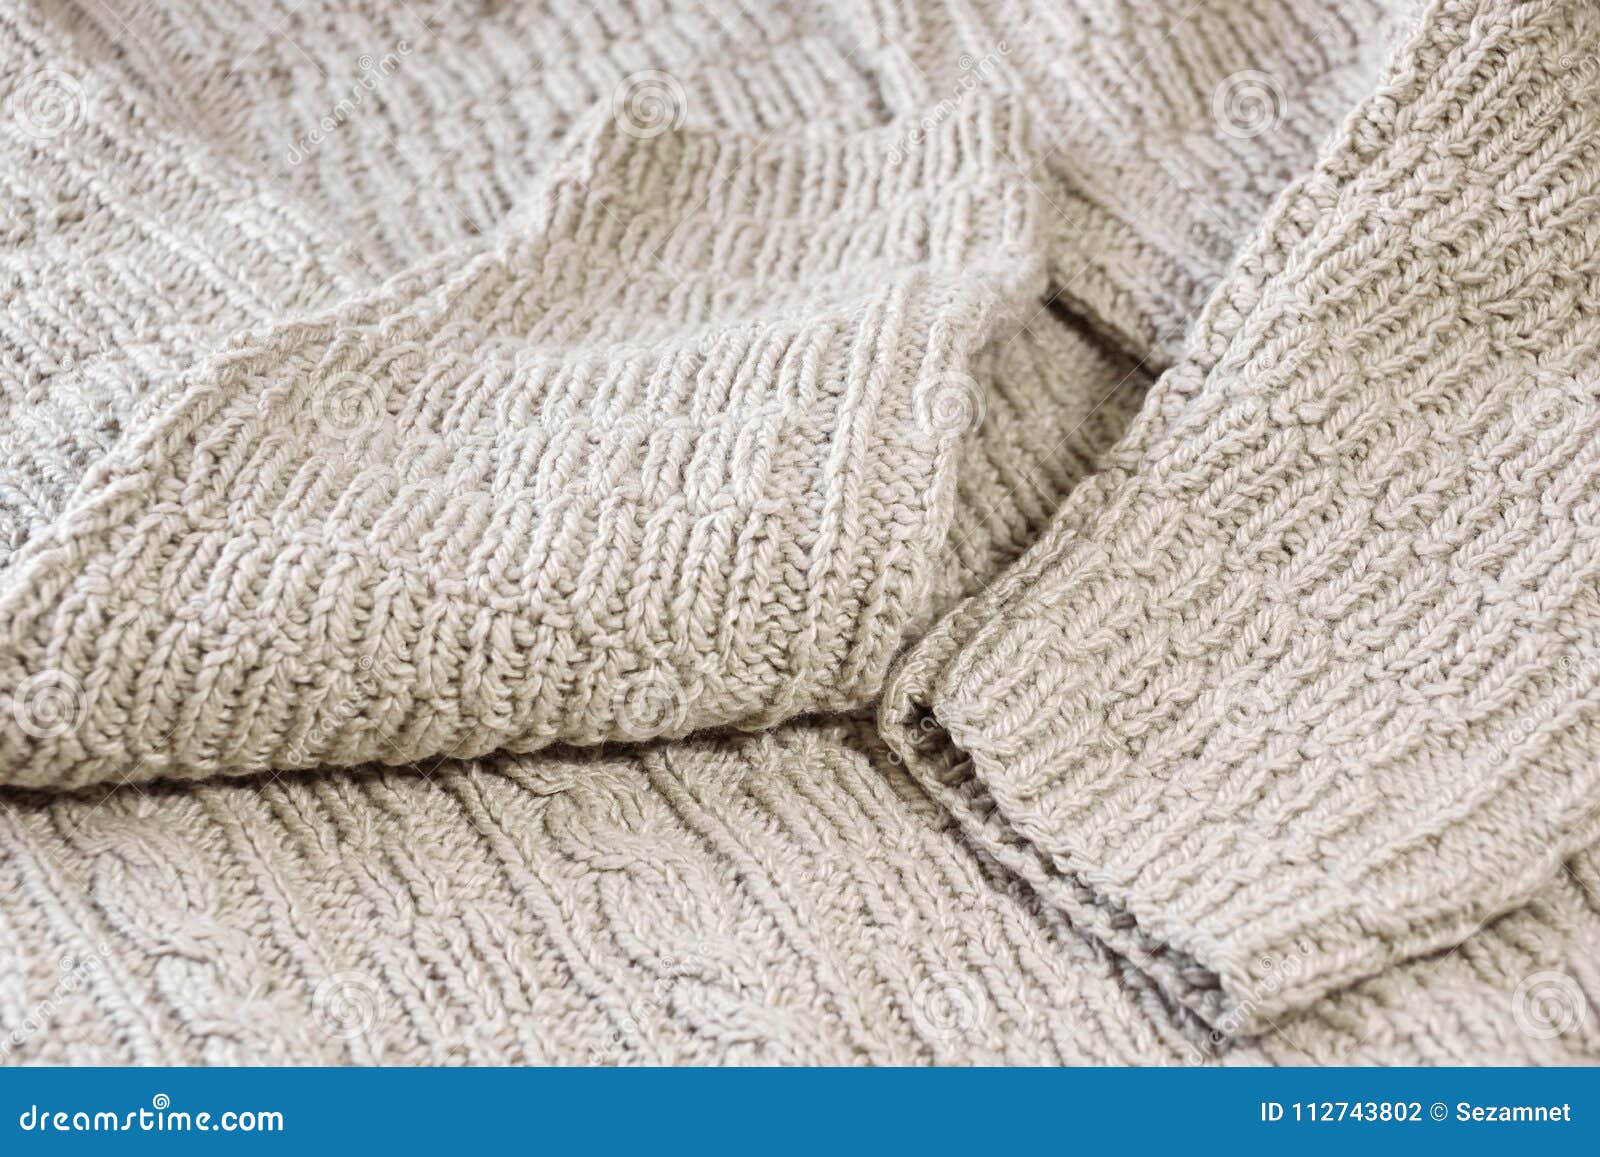 Hand Knit Texture White Wool Sweater Stock Photo Image Of